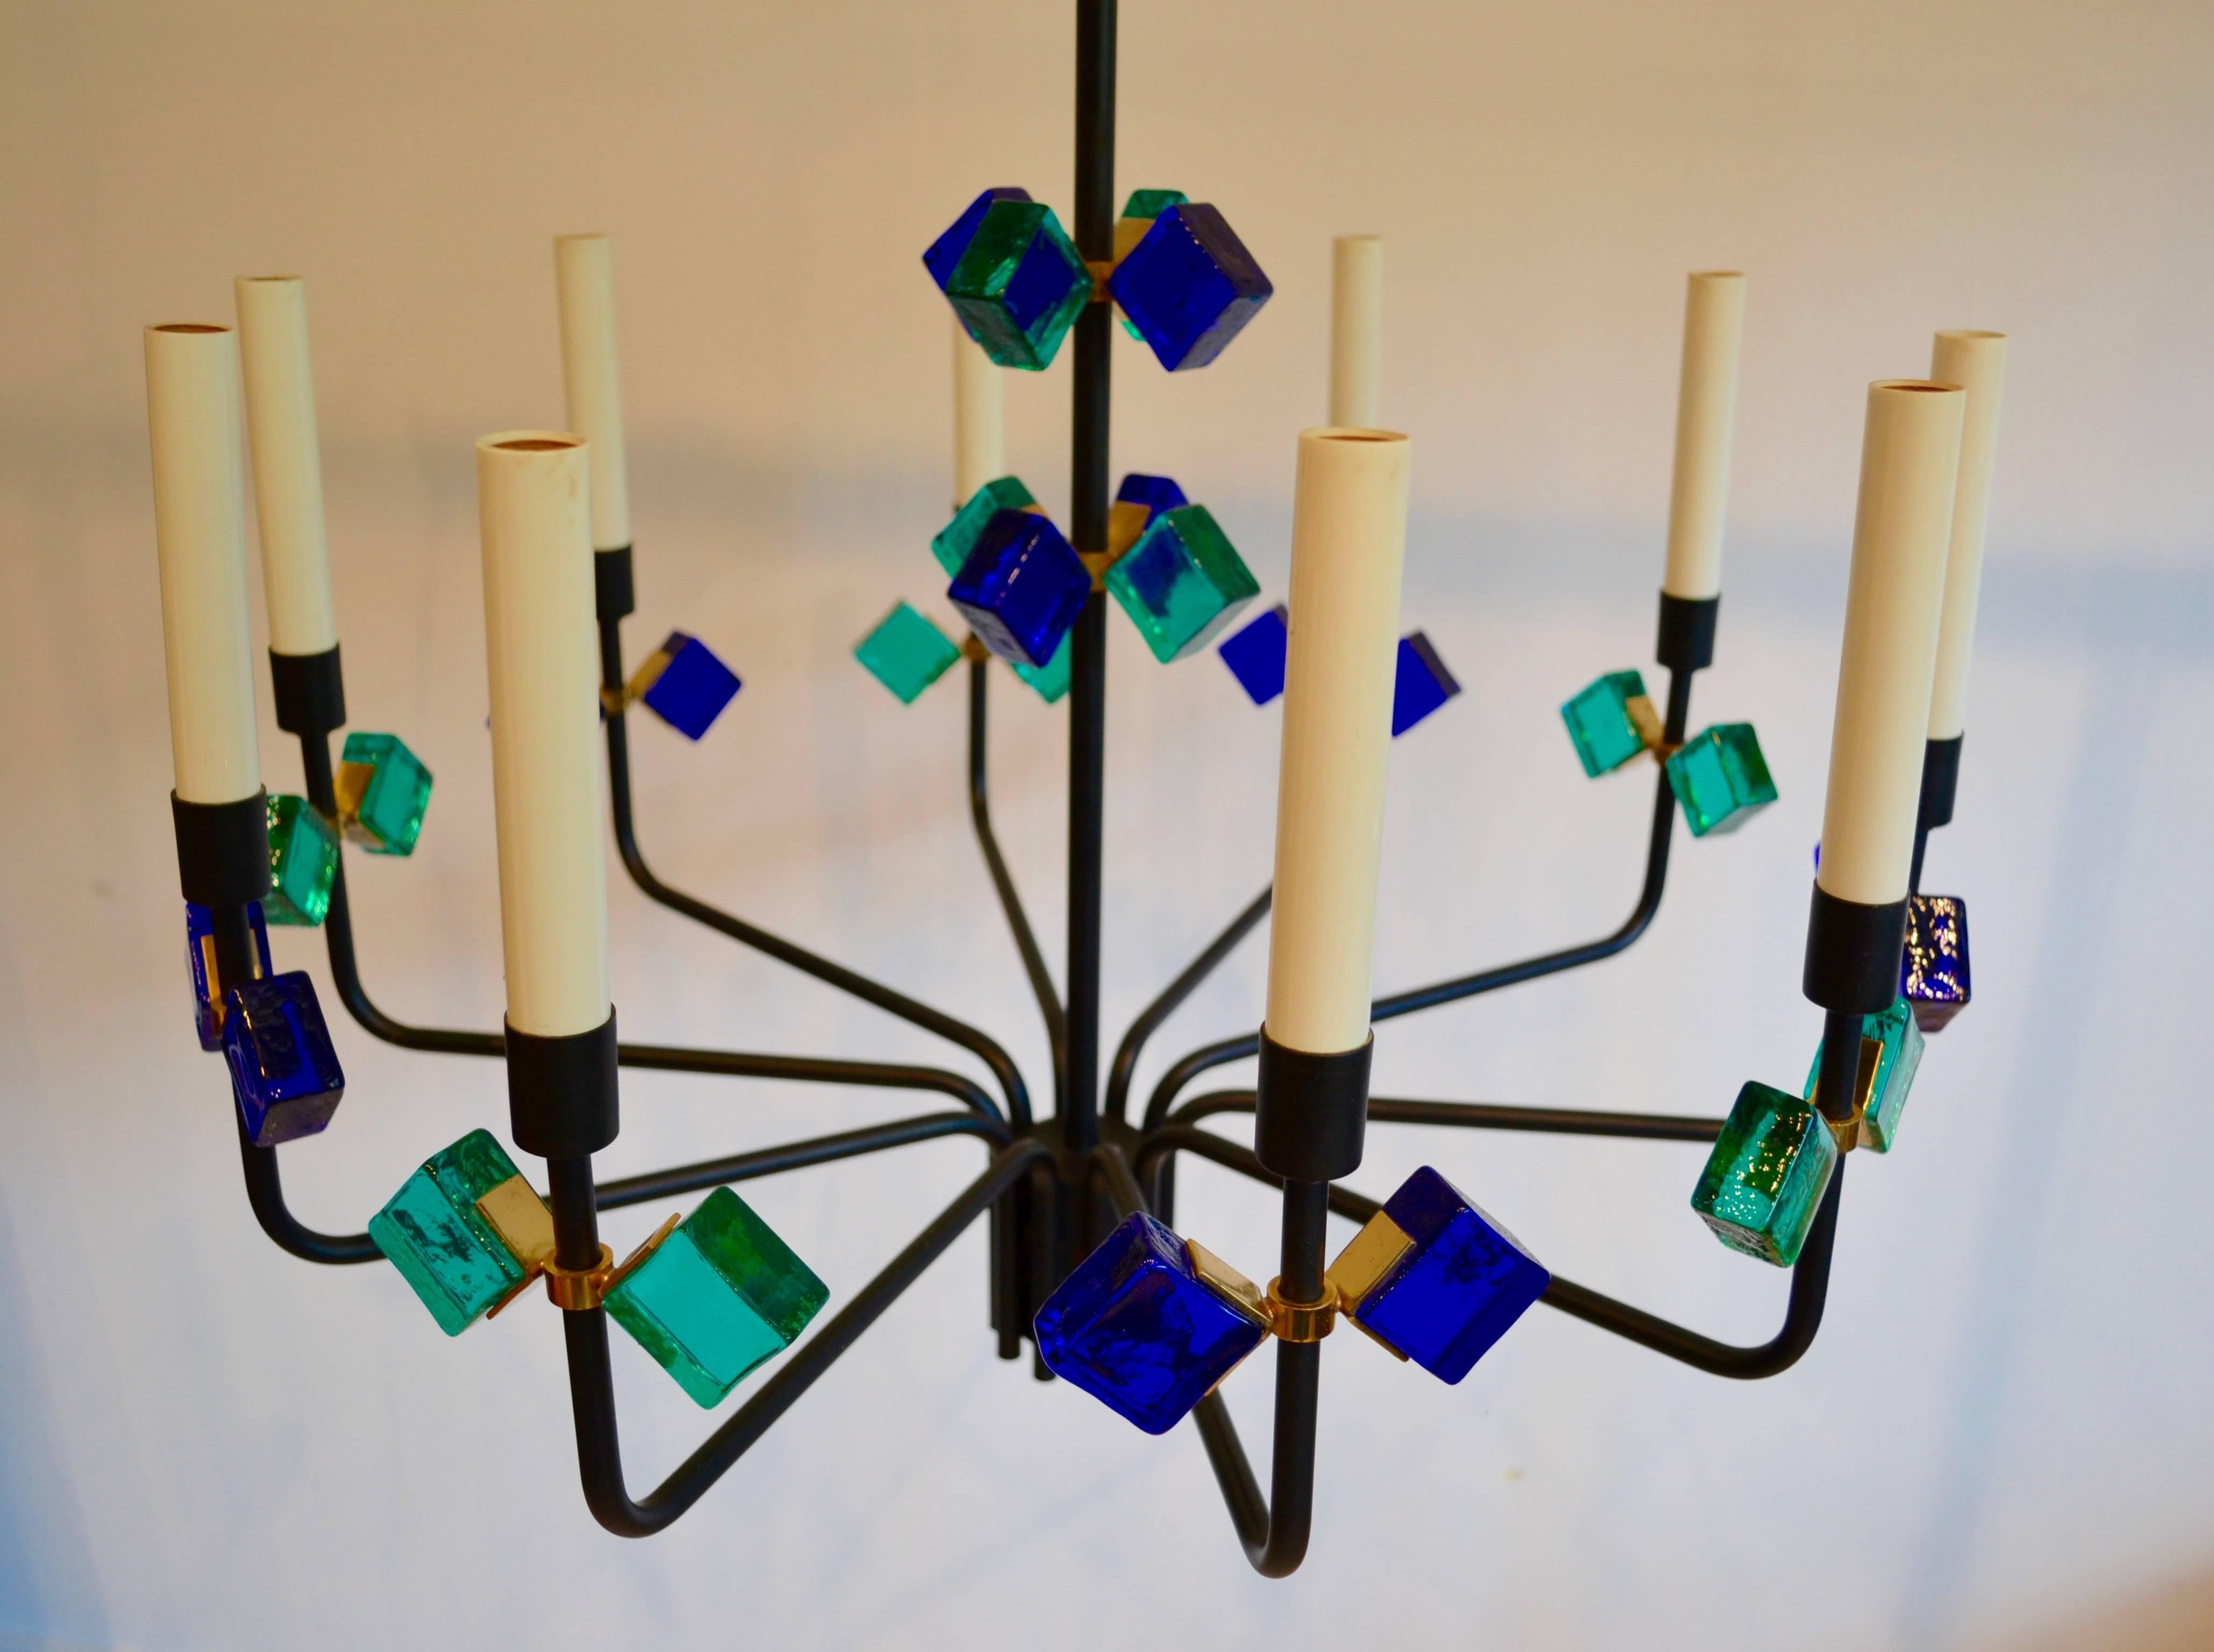 Rare and exceptional Danish chandelier by Svend Aage Holm Sorensen for Holm Sorensen and Company, Denmark, 1950. Gorgeous cobalt blue and aqua glass with brass detail and matte black metal frame. Ten lights.